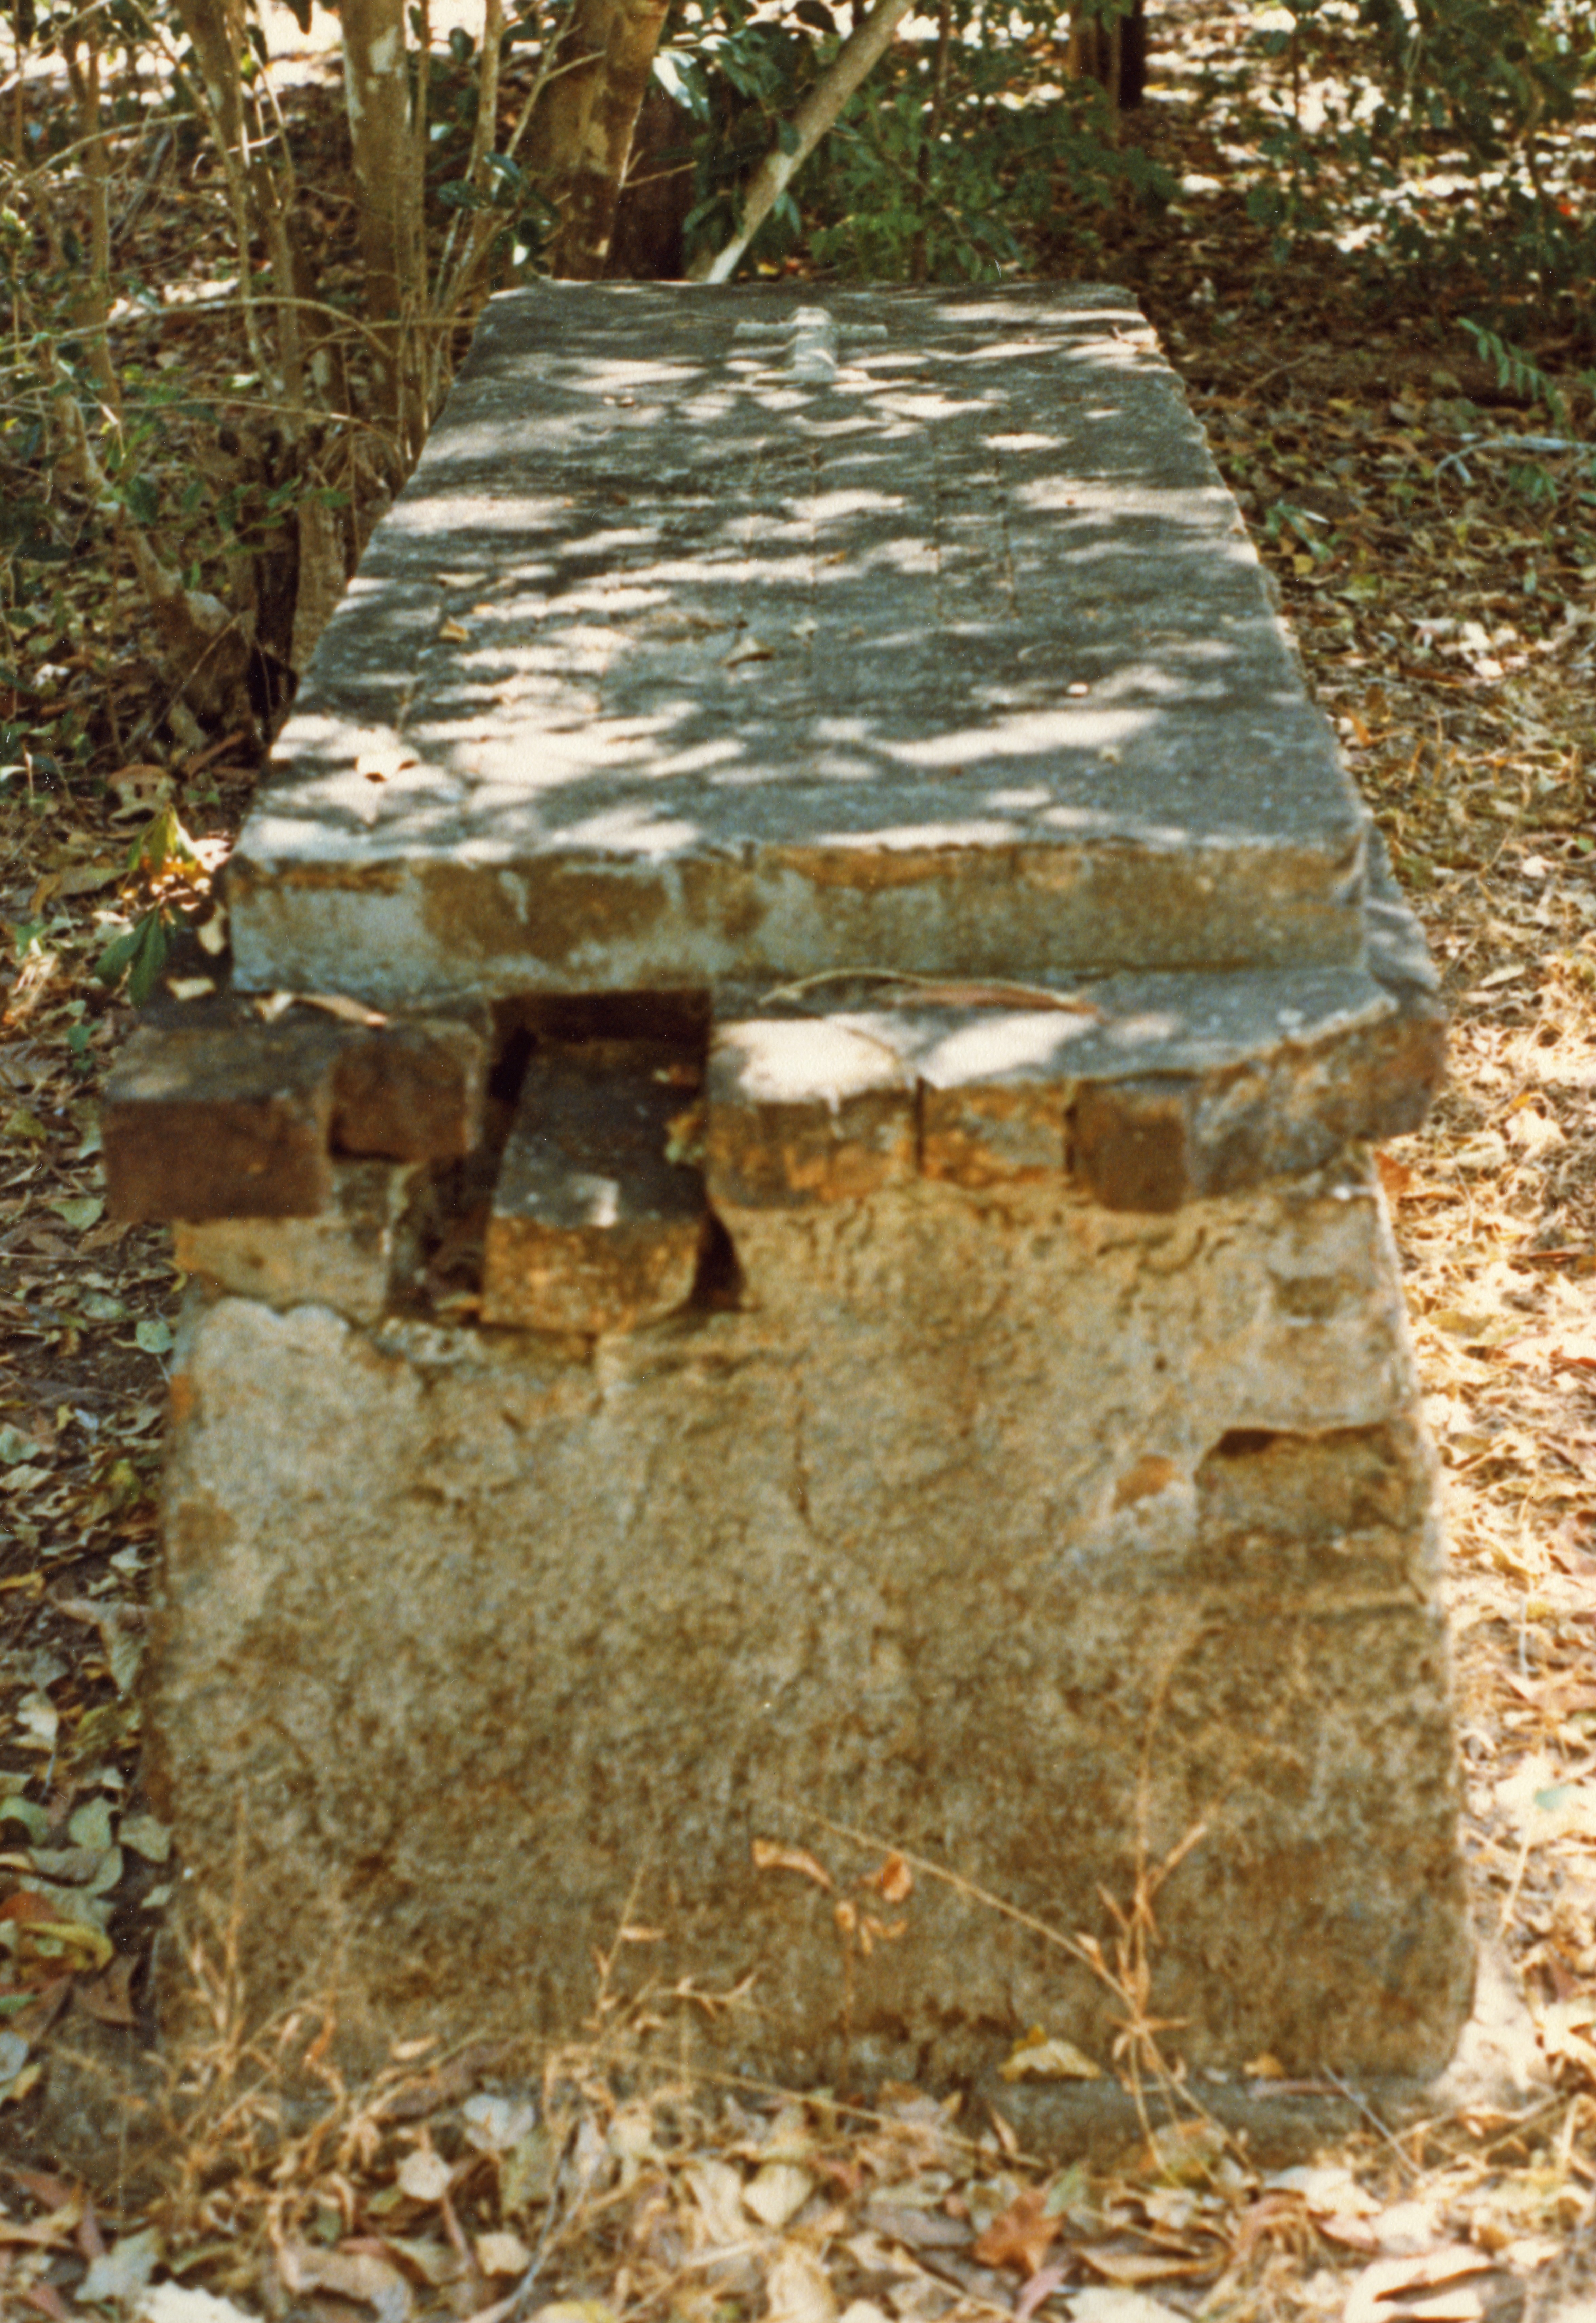 Depicts an above-ground brick tomb with cross on top.